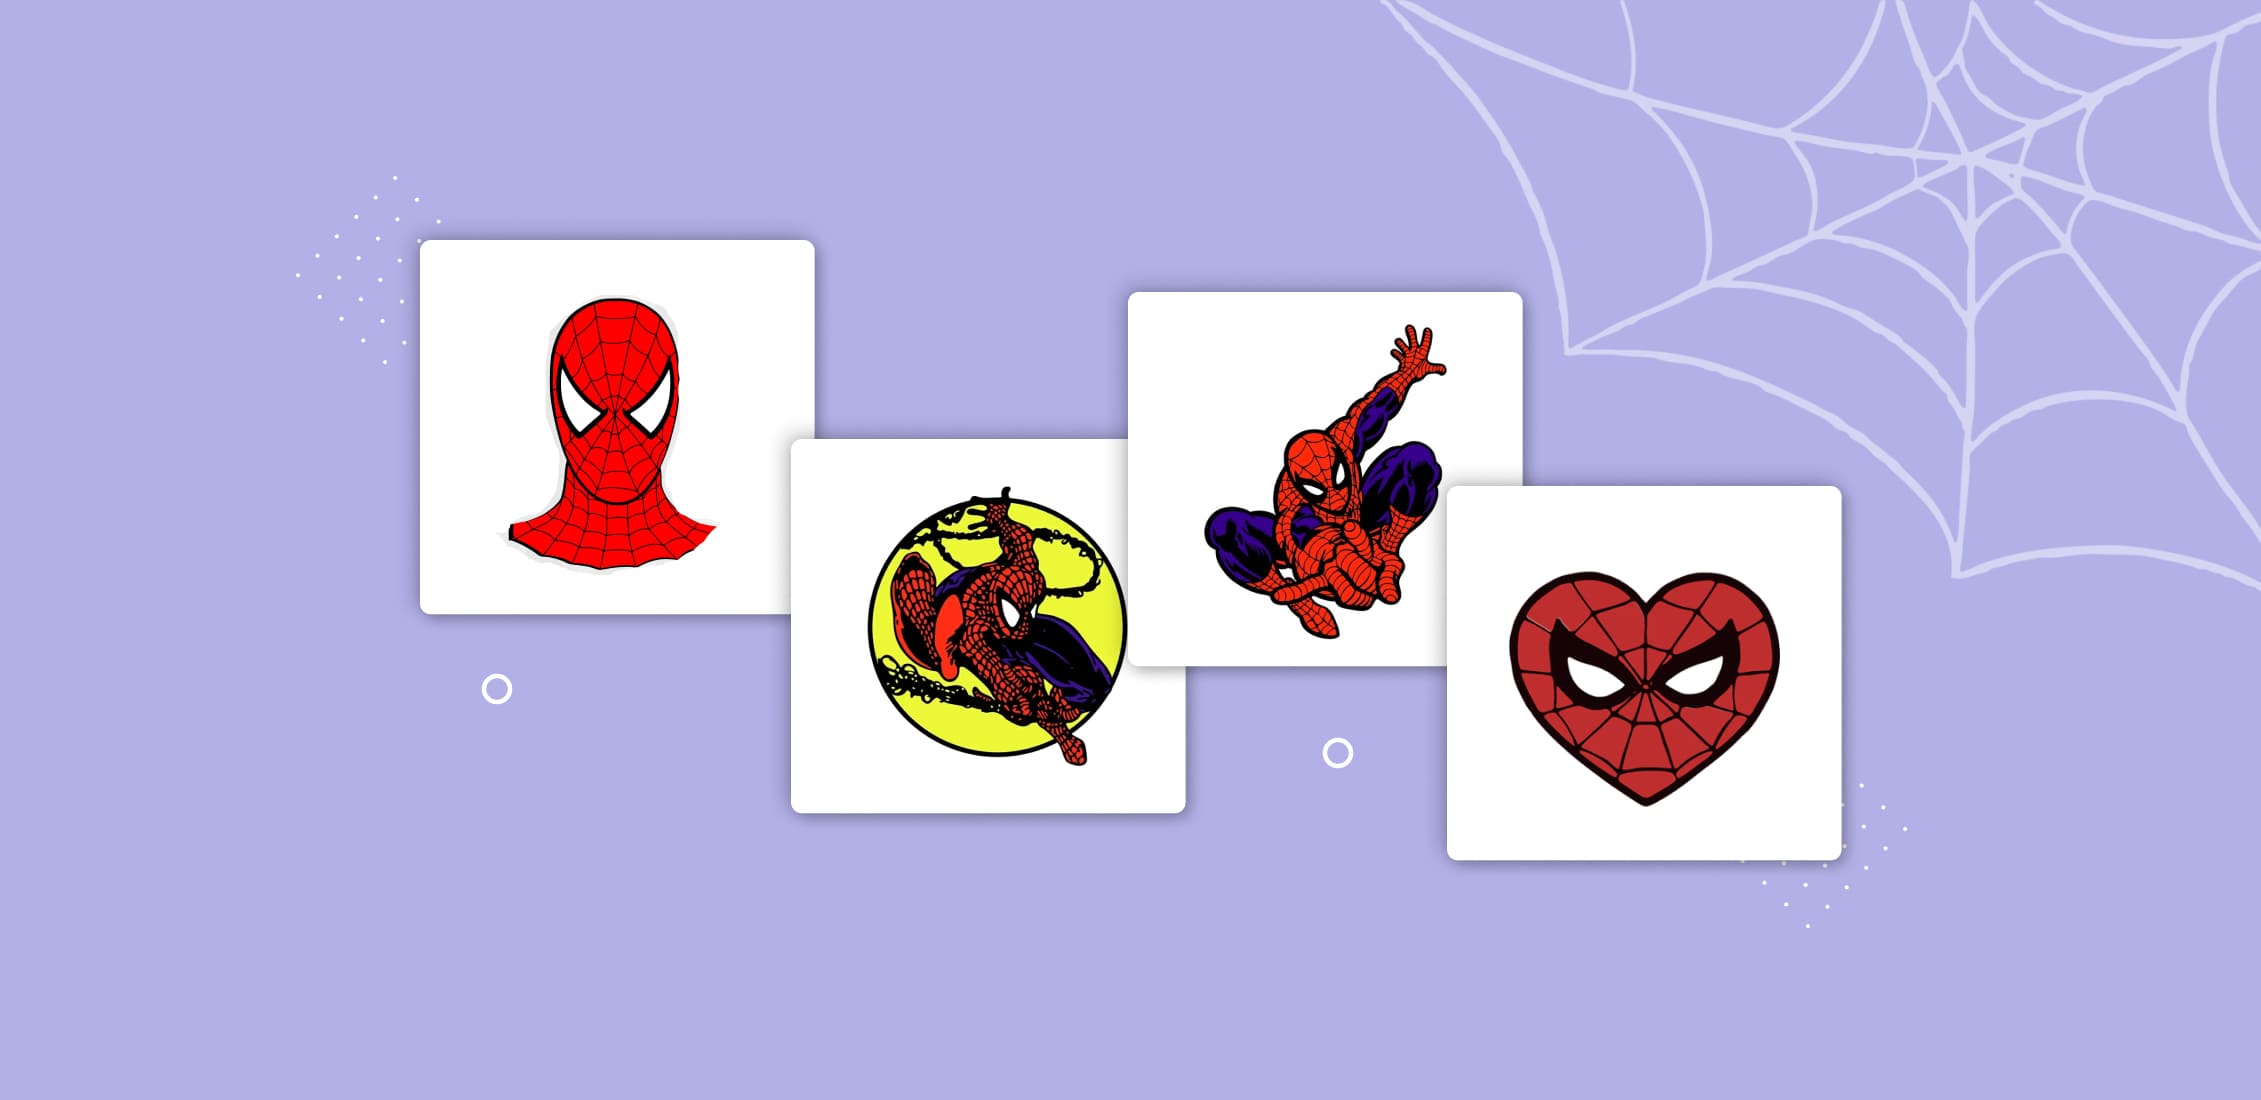 Spiderman playing card game on a purple background.